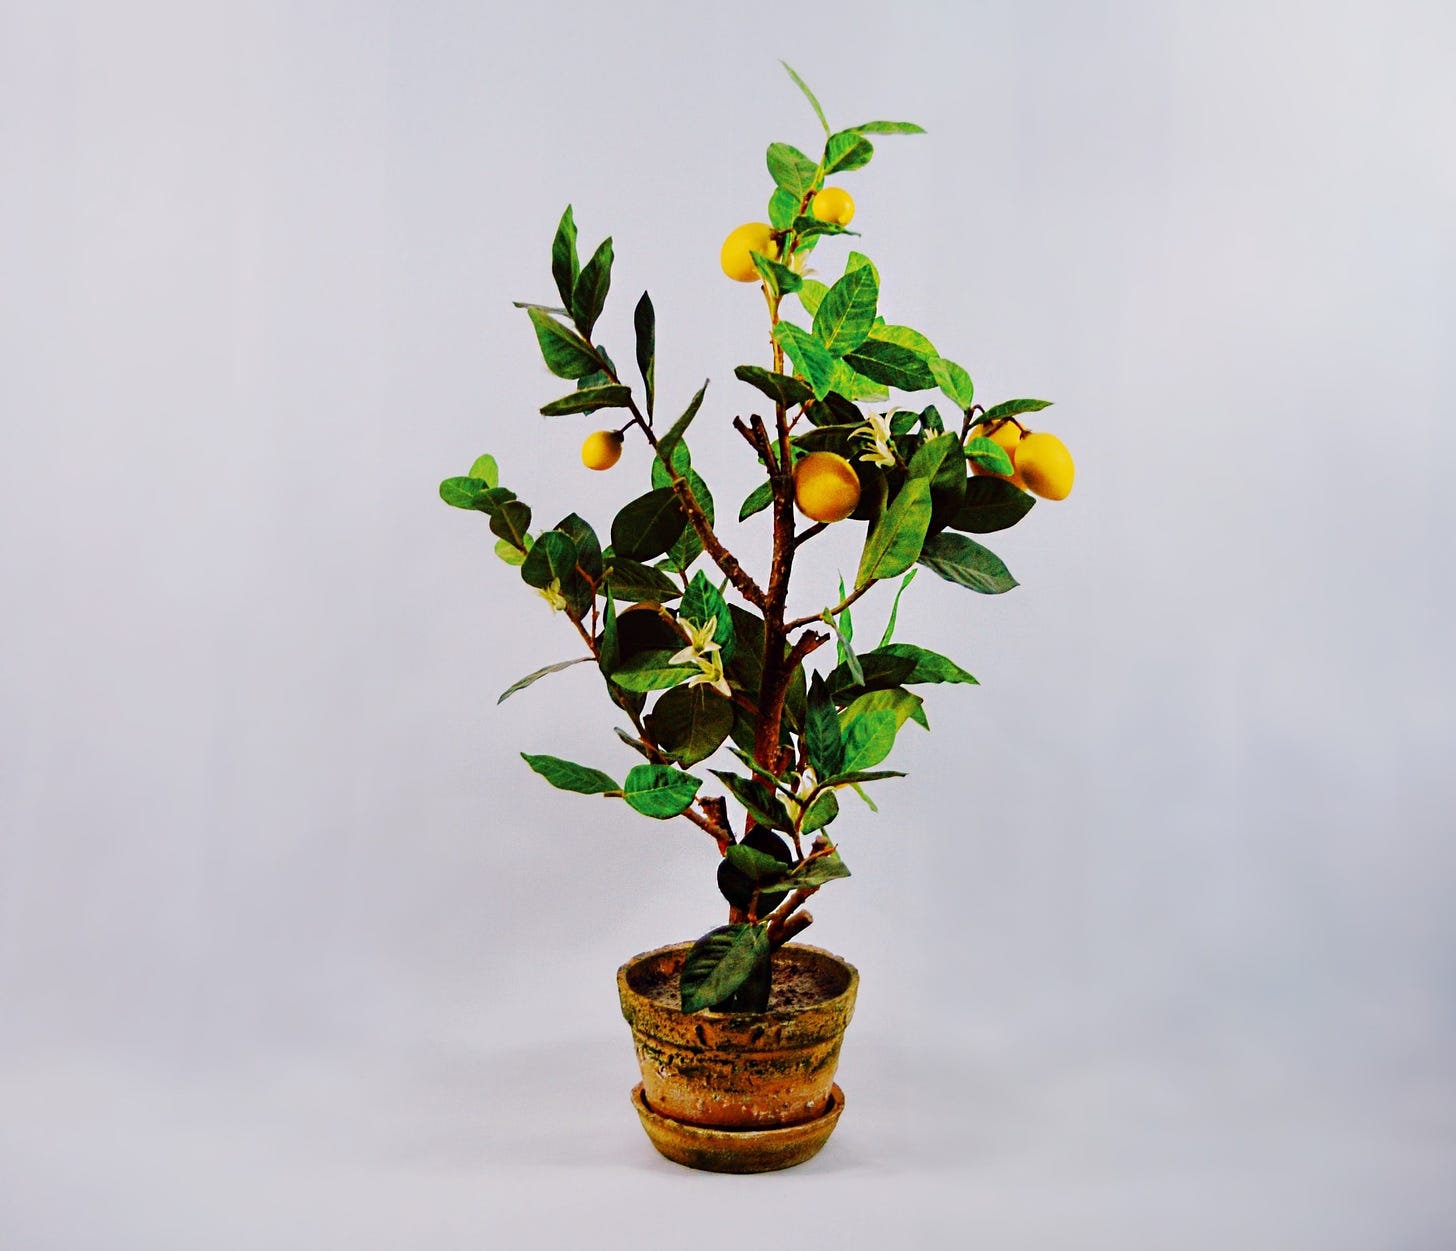 photo of tiny tree clipping, one foot tall or less, in a small clay pot. tree has bright green leaves and bright orange fruit. tree sits against a grey pattern flat photo background